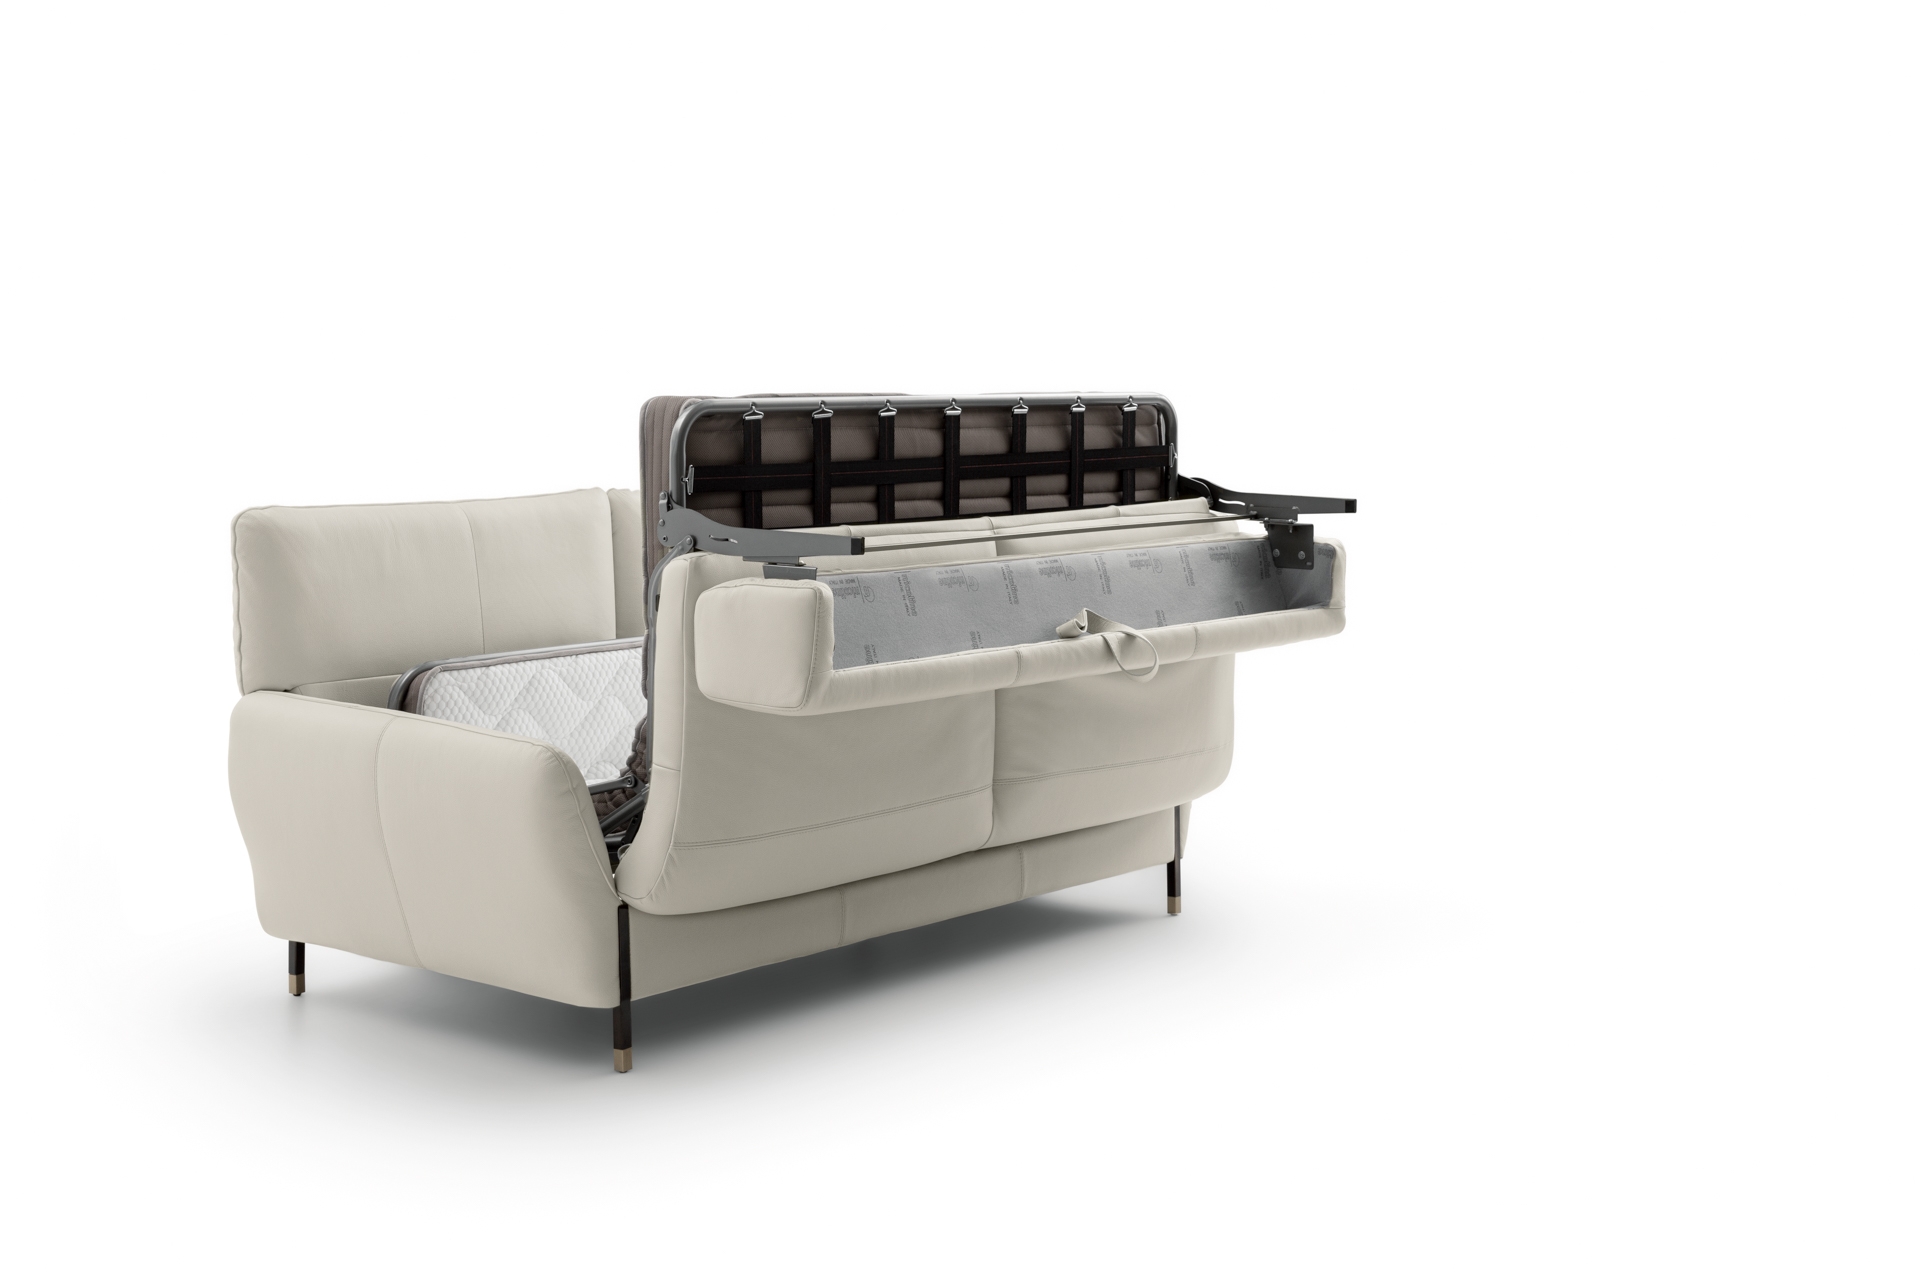 giotto_seating_sofa_sleeper_bed_parnian_furniture